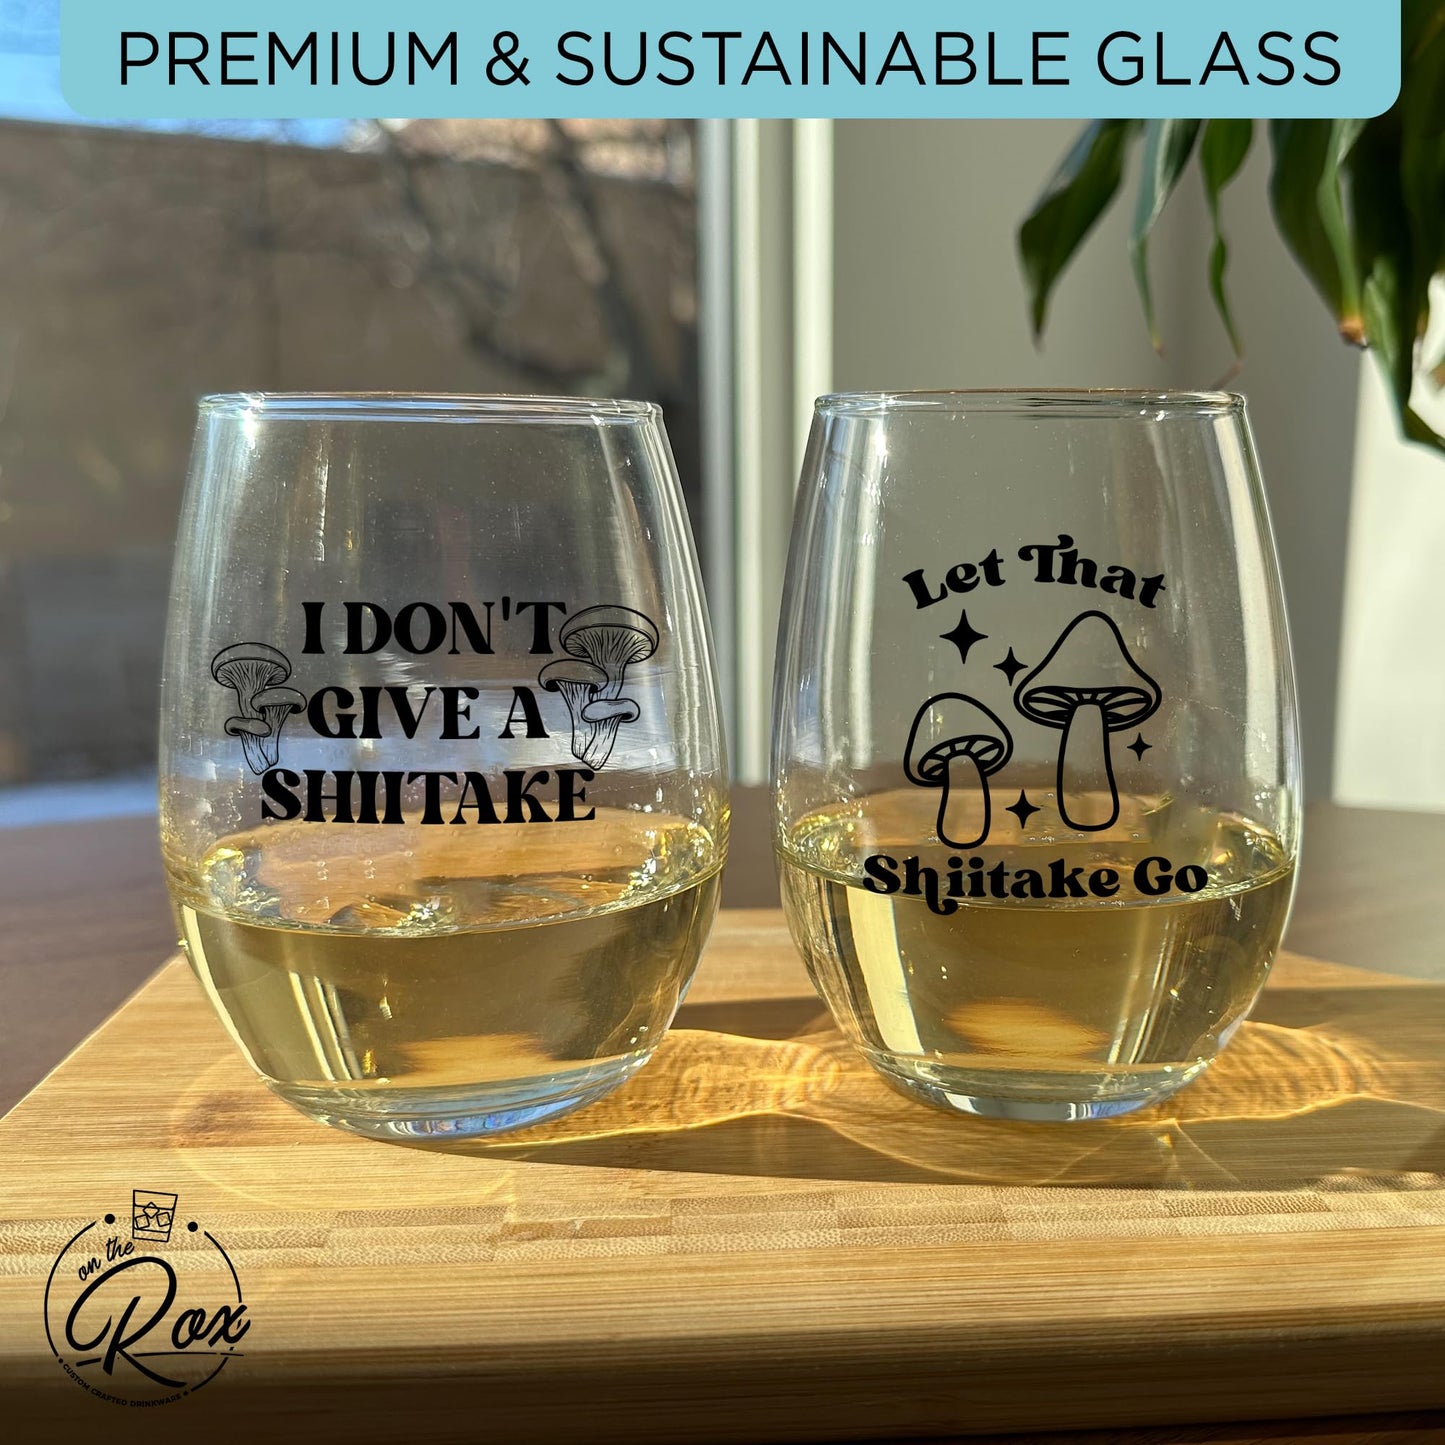 Mushroom Glass Gifts For Her and Him - 2PC Funny Wine Glass - 15oz Printed "I Don't Give A Shiitake", "Let That Shiitake Go"